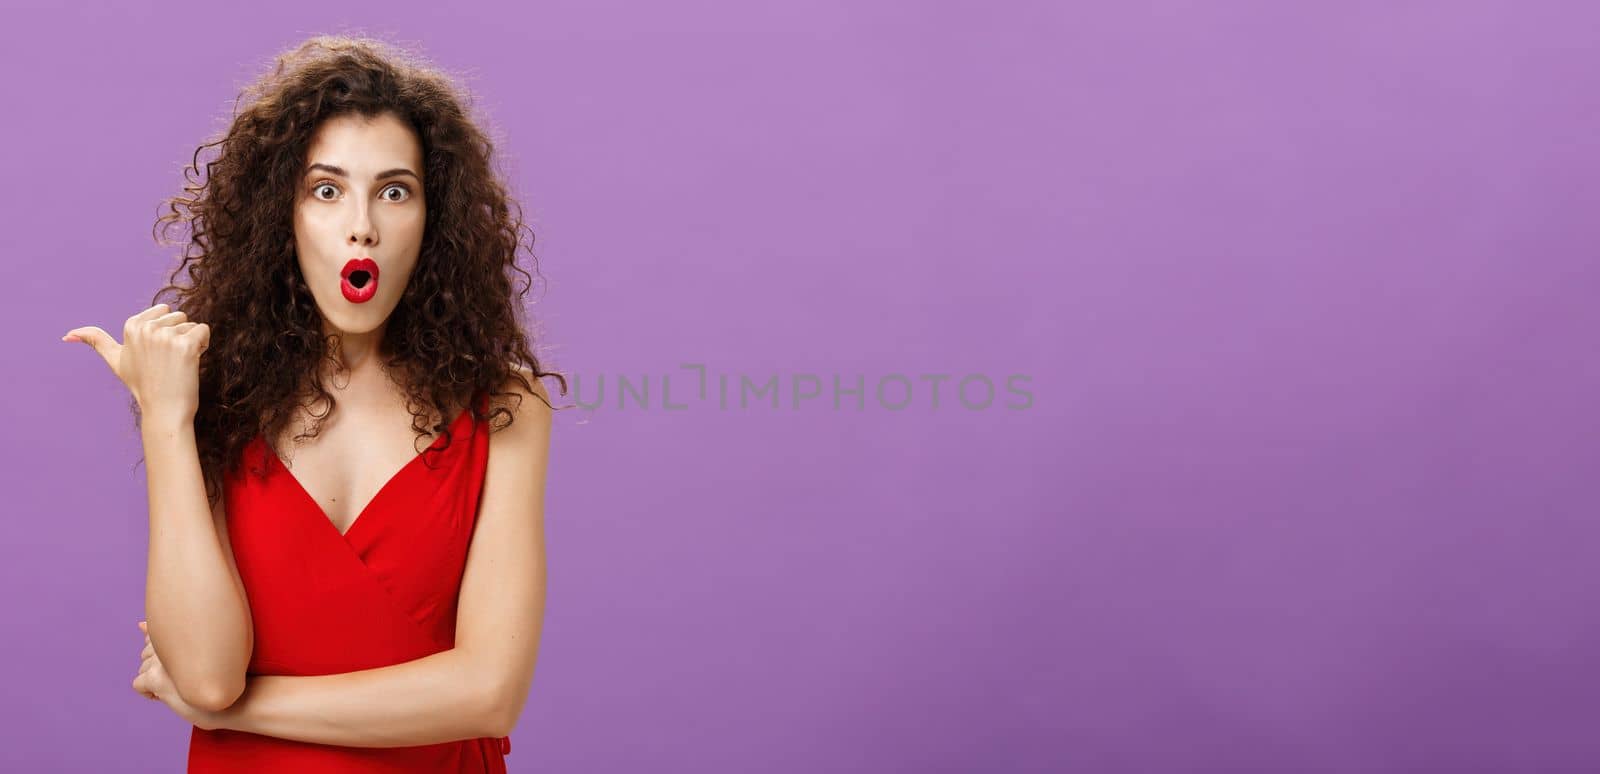 Curious and questioned amazed woman. with curly hairstyle in stylish red dress folding lips in wow sound pointing left with thumb asking question about stunning and thrilling scene over purple wall.